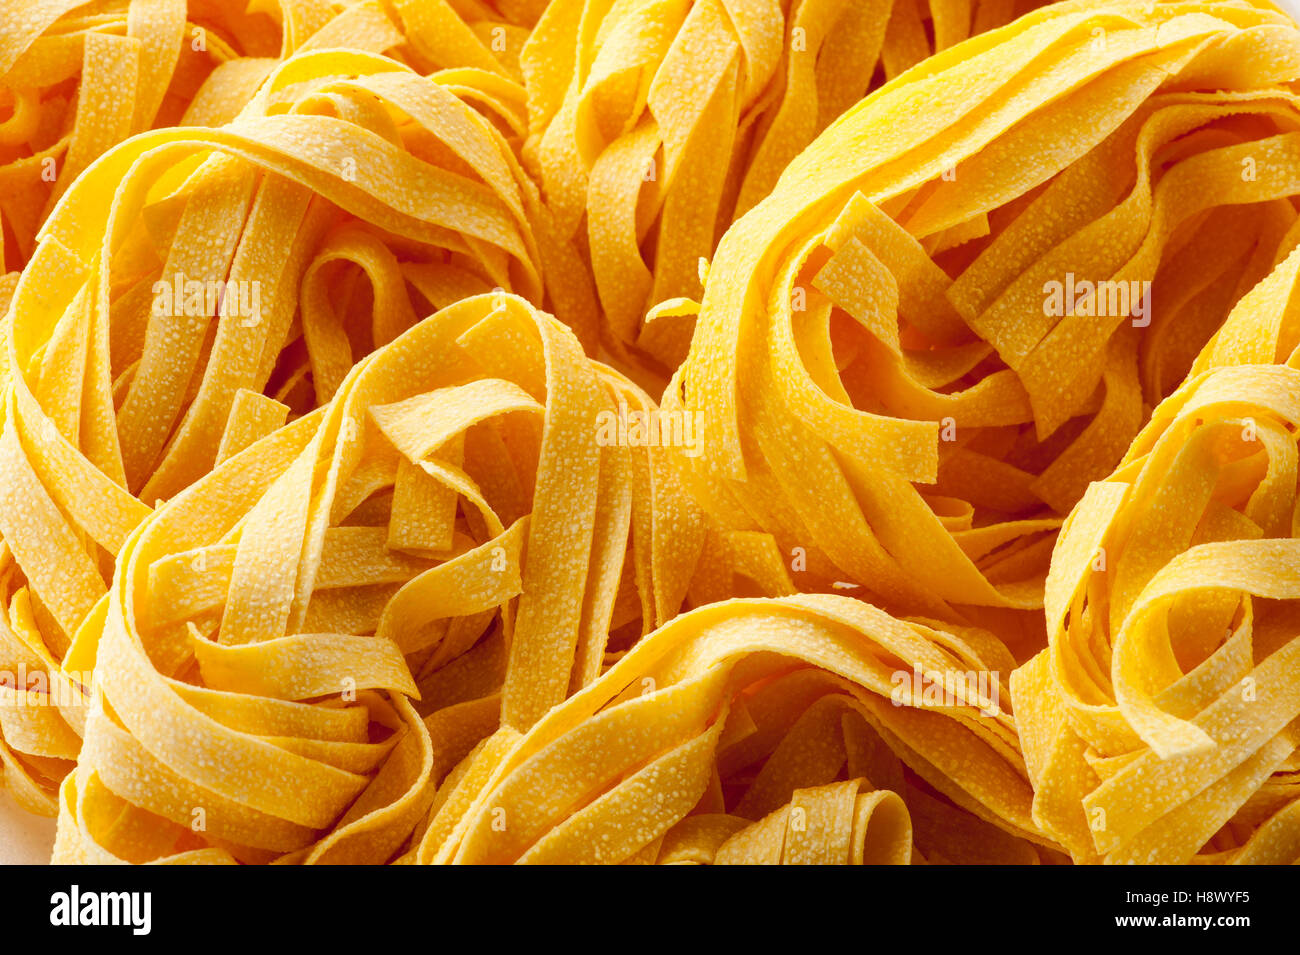 Close up of Italian tagliatelle pasta noodles in a full frame view for food or nutritional concepts Stock Photo